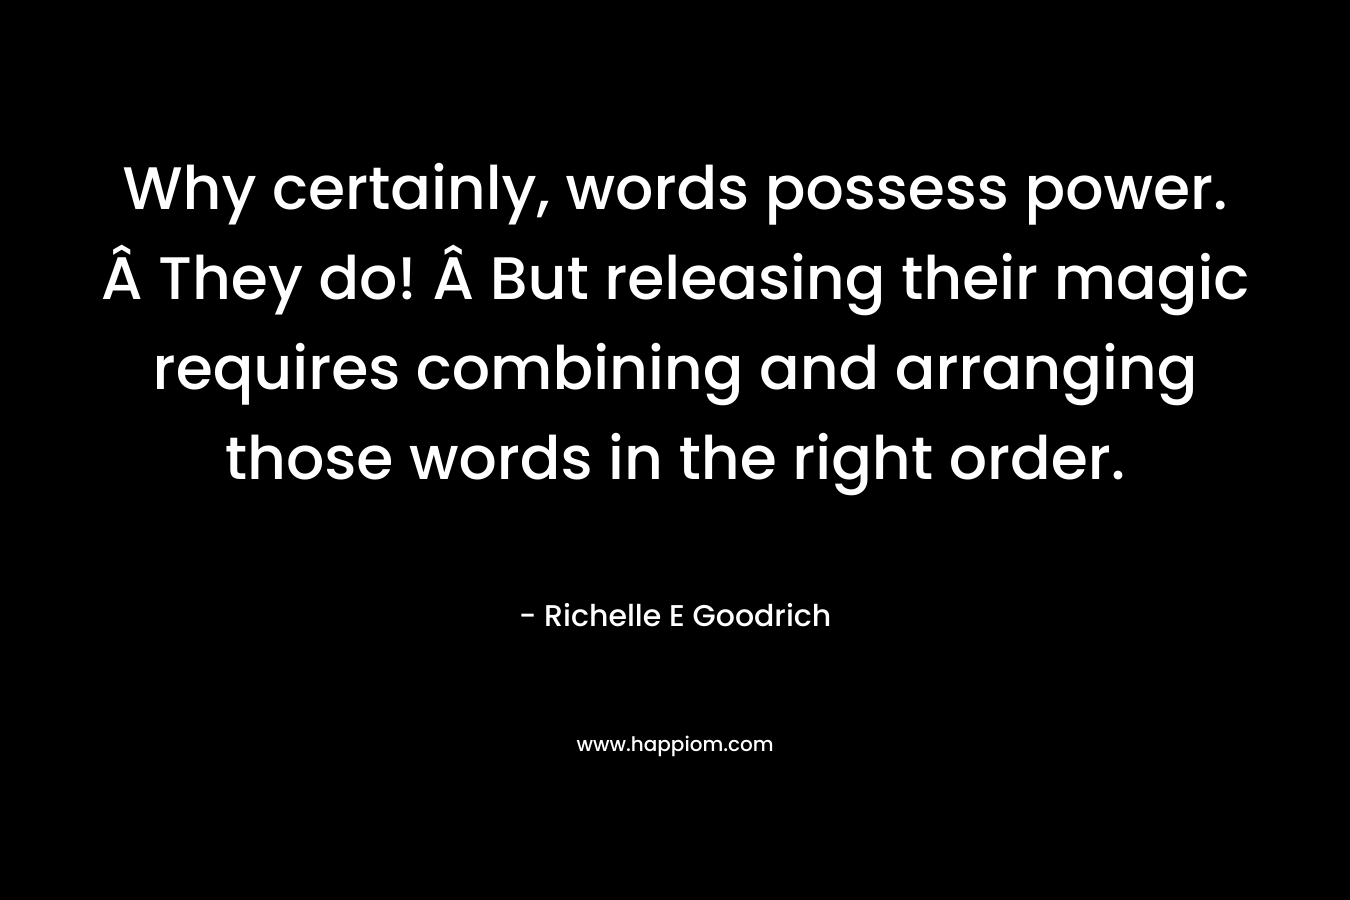 Why certainly, words possess power. Â They do! Â But releasing their magic requires combining and arranging those words in the right order.